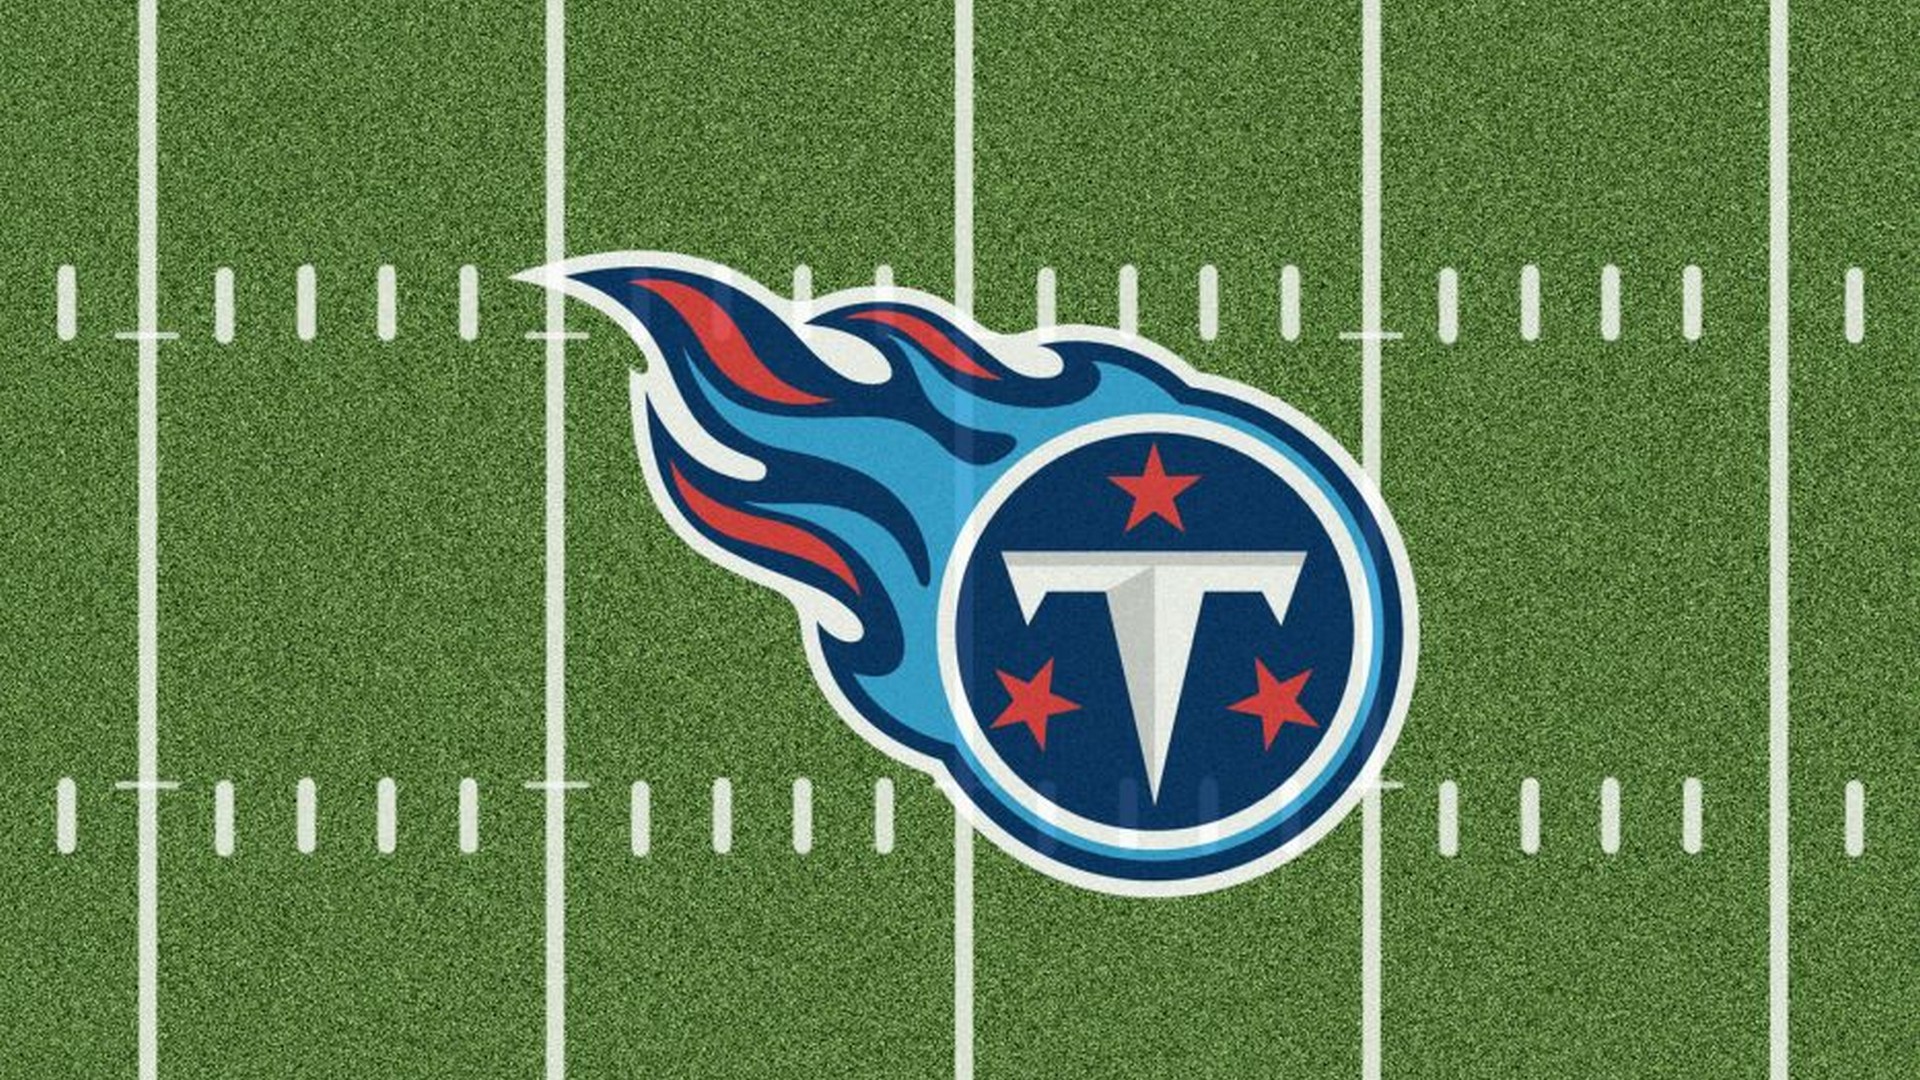 Tennessee Titans Desktop Wallpaper With high-resolution 1920X1080 pixel. You can use this wallpaper for your Mac or Windows Desktop Background, iPhone, Android or Tablet and another Smartphone device